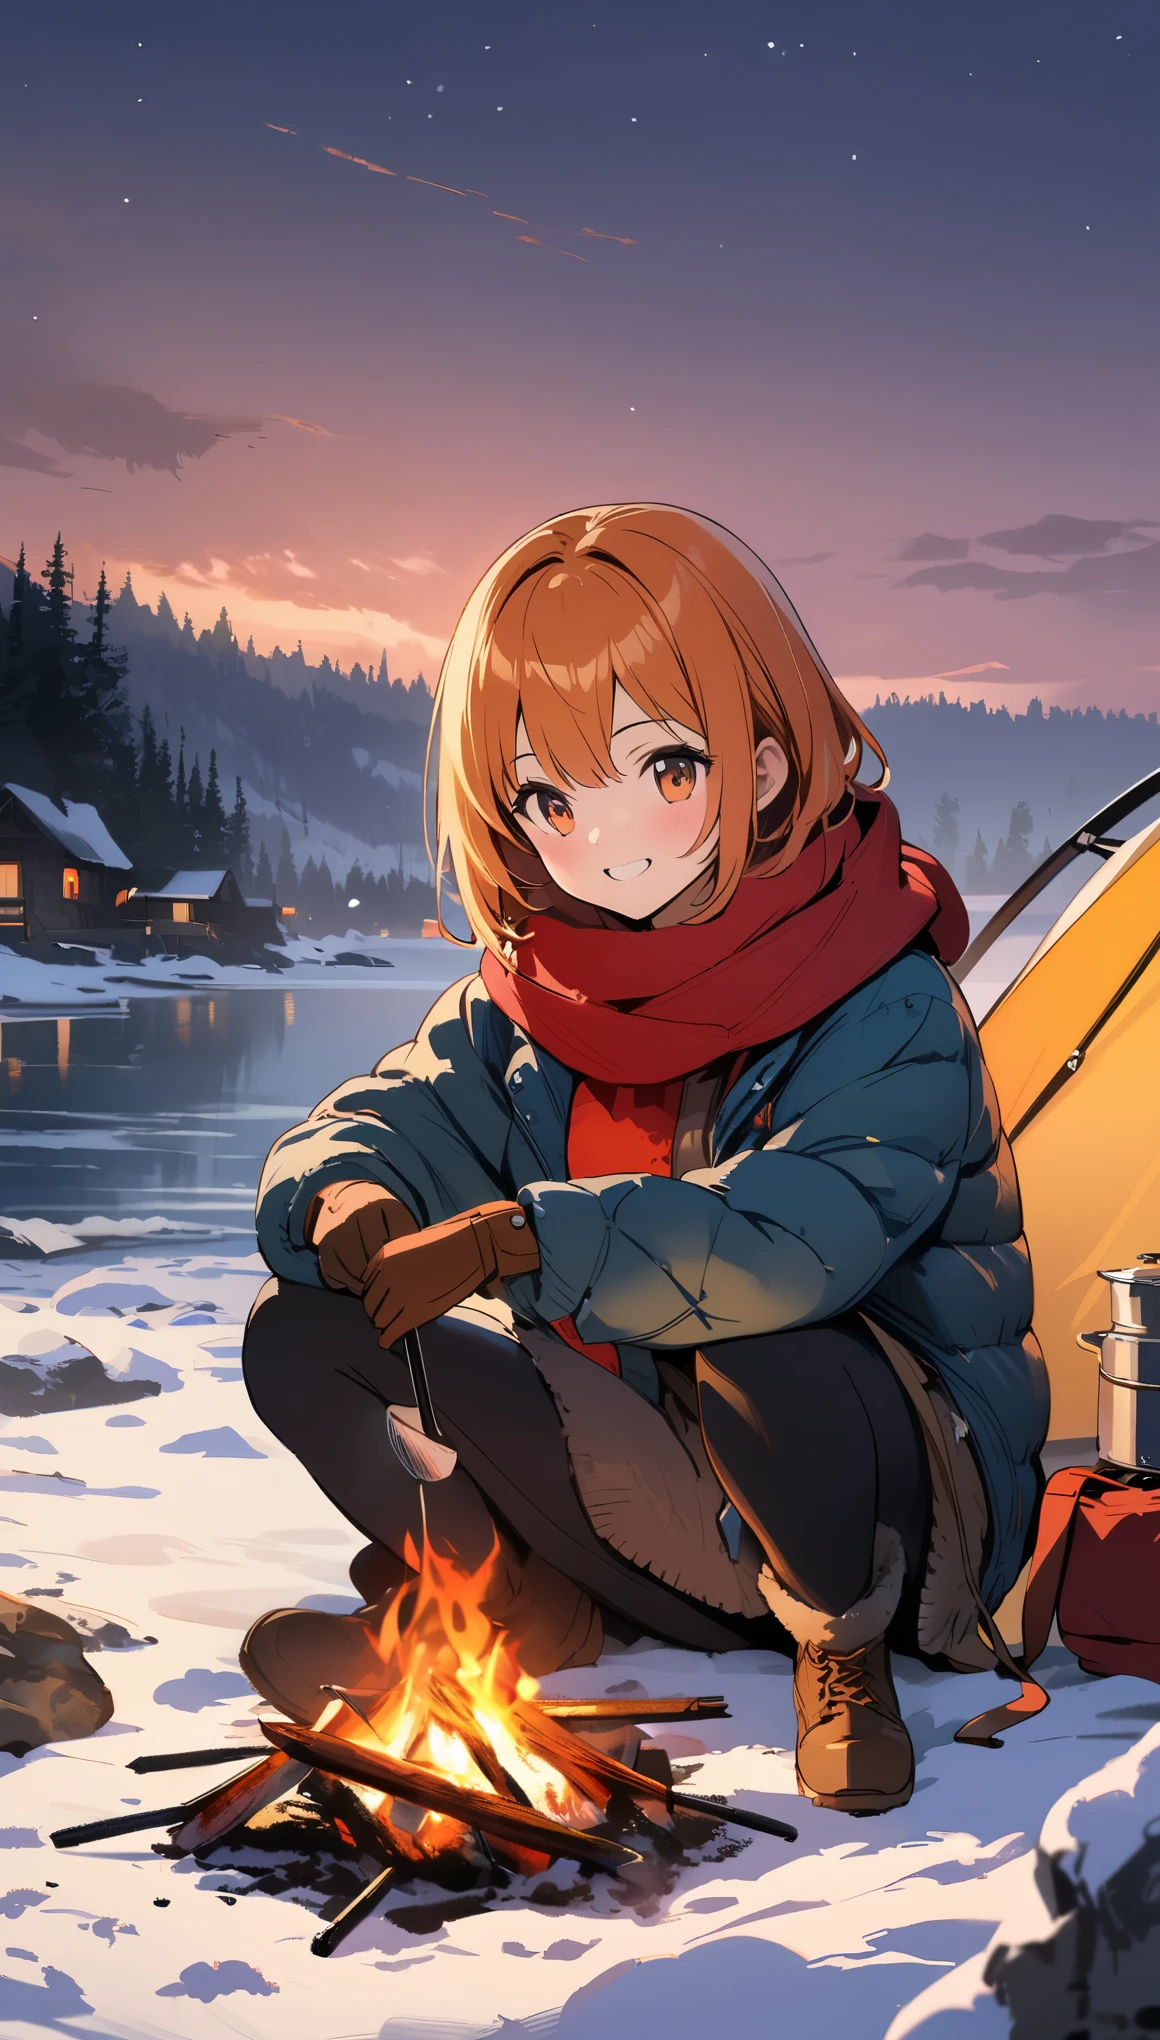 masterpiece, highly detailed, concept art, oil painting, gouache, hard brush 1girl, orange hair, cute smile, sitting, wearing down jacket, scarf, glove, camping, campfire, grilling fish, near the river, snowy, night, HD